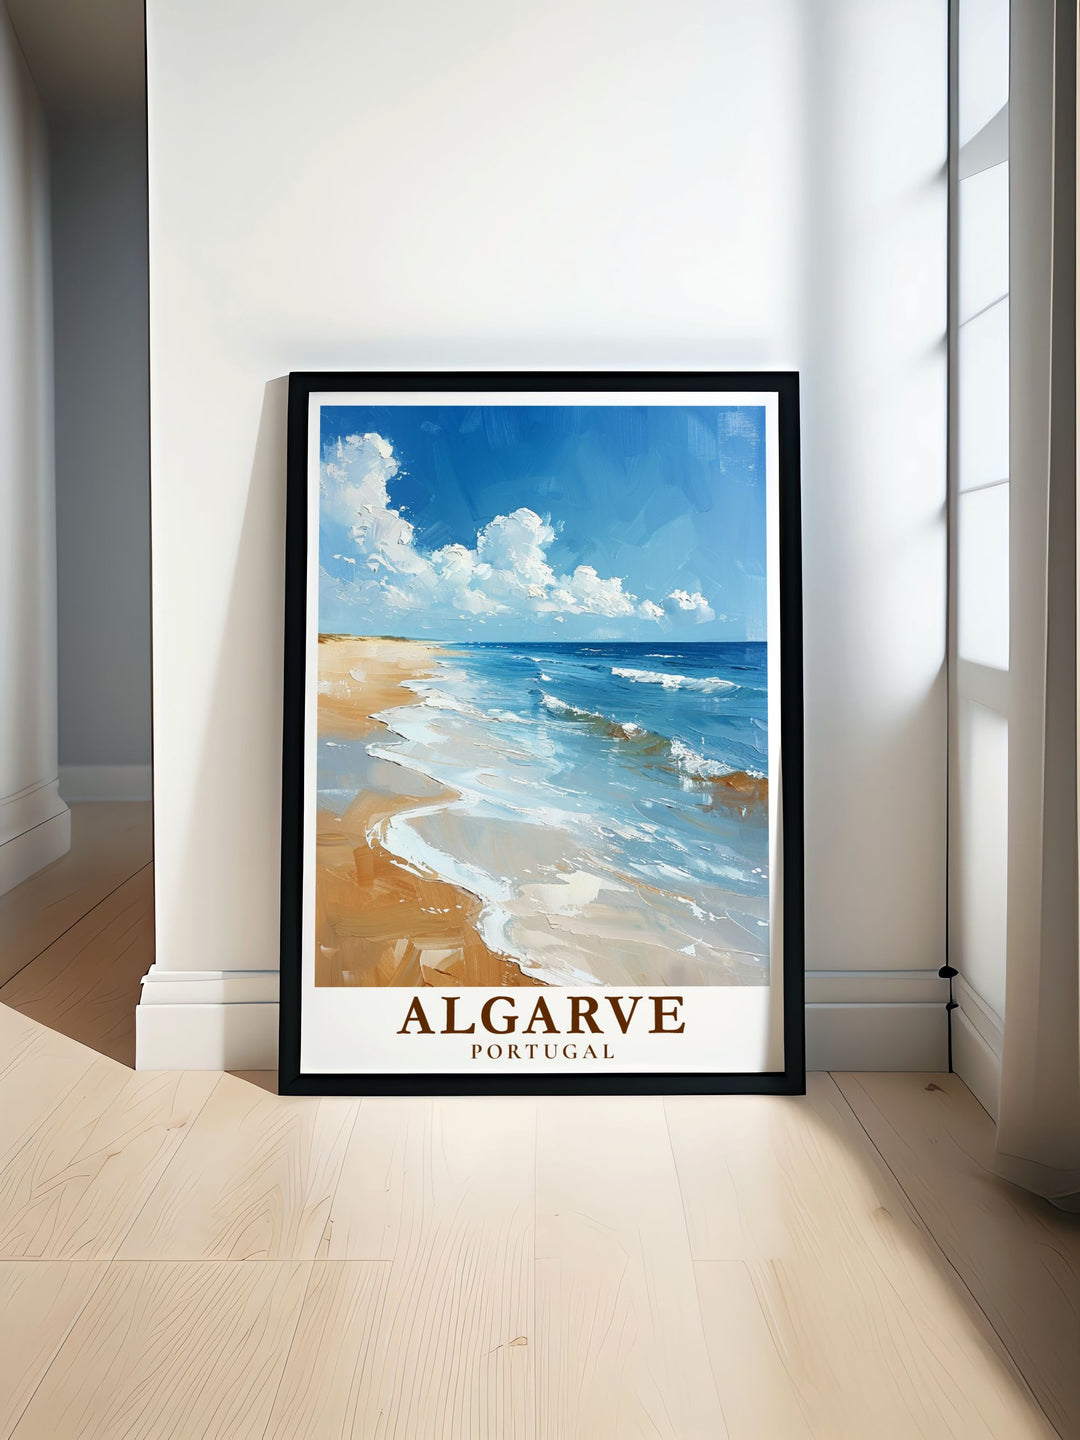 The iconic Algarve Beach is brought to life in this detailed travel poster, showcasing its vibrant colors and stunning landscapes, perfect for any room in need of a coastal vibe.